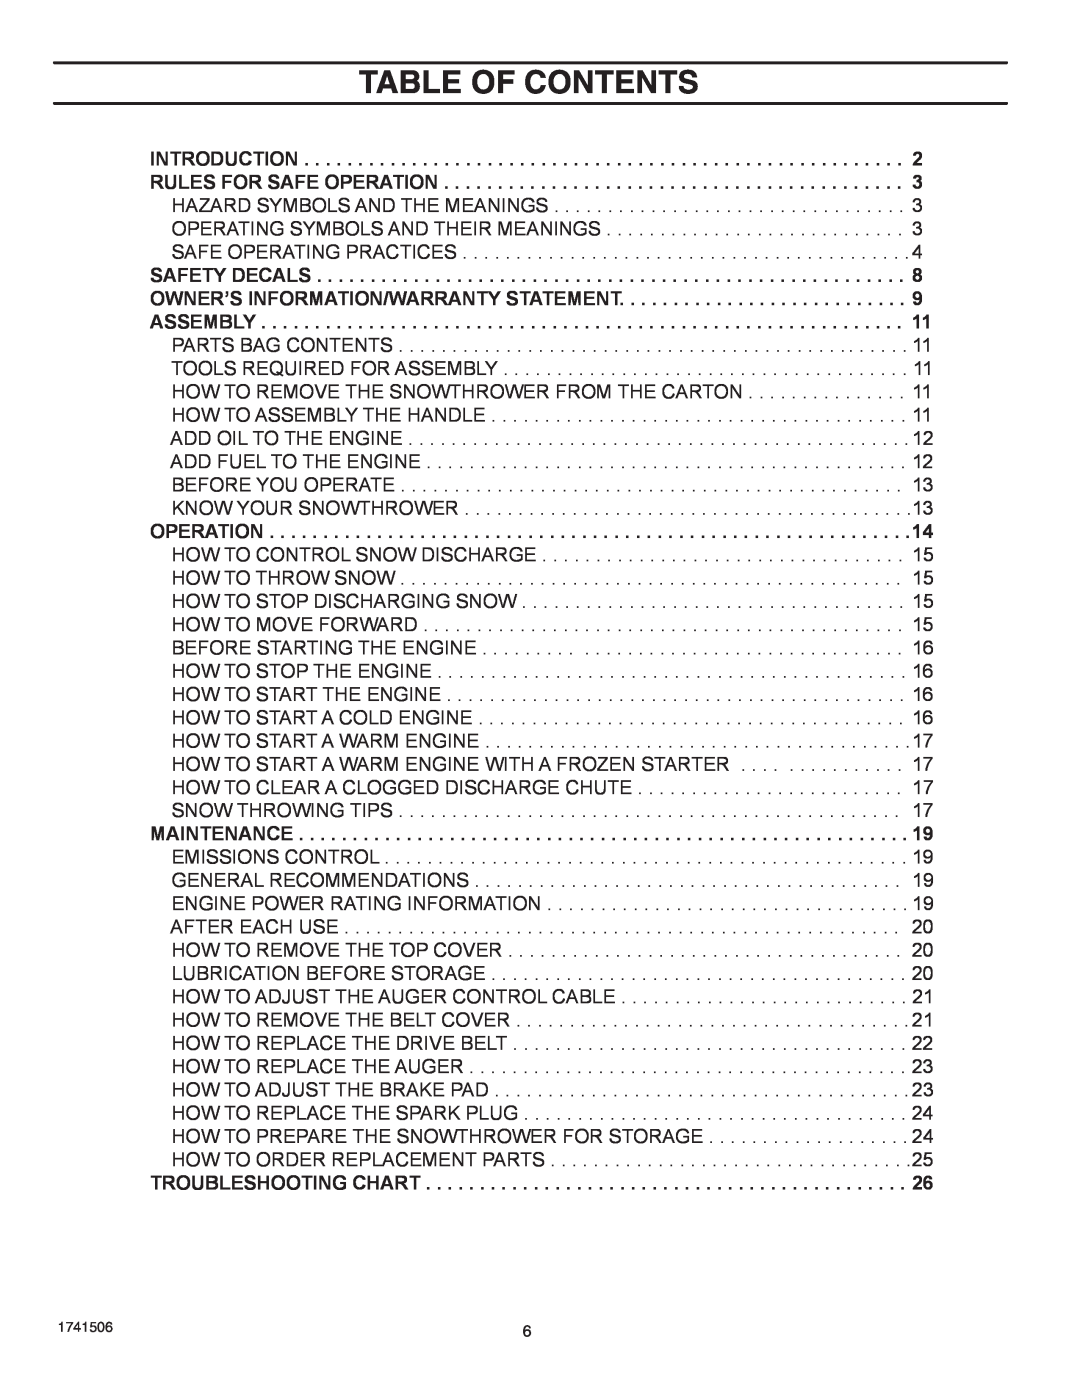 Husqvarna 5021 R, 5021 E manual Table Of Contents, Troubleshooting Chart 